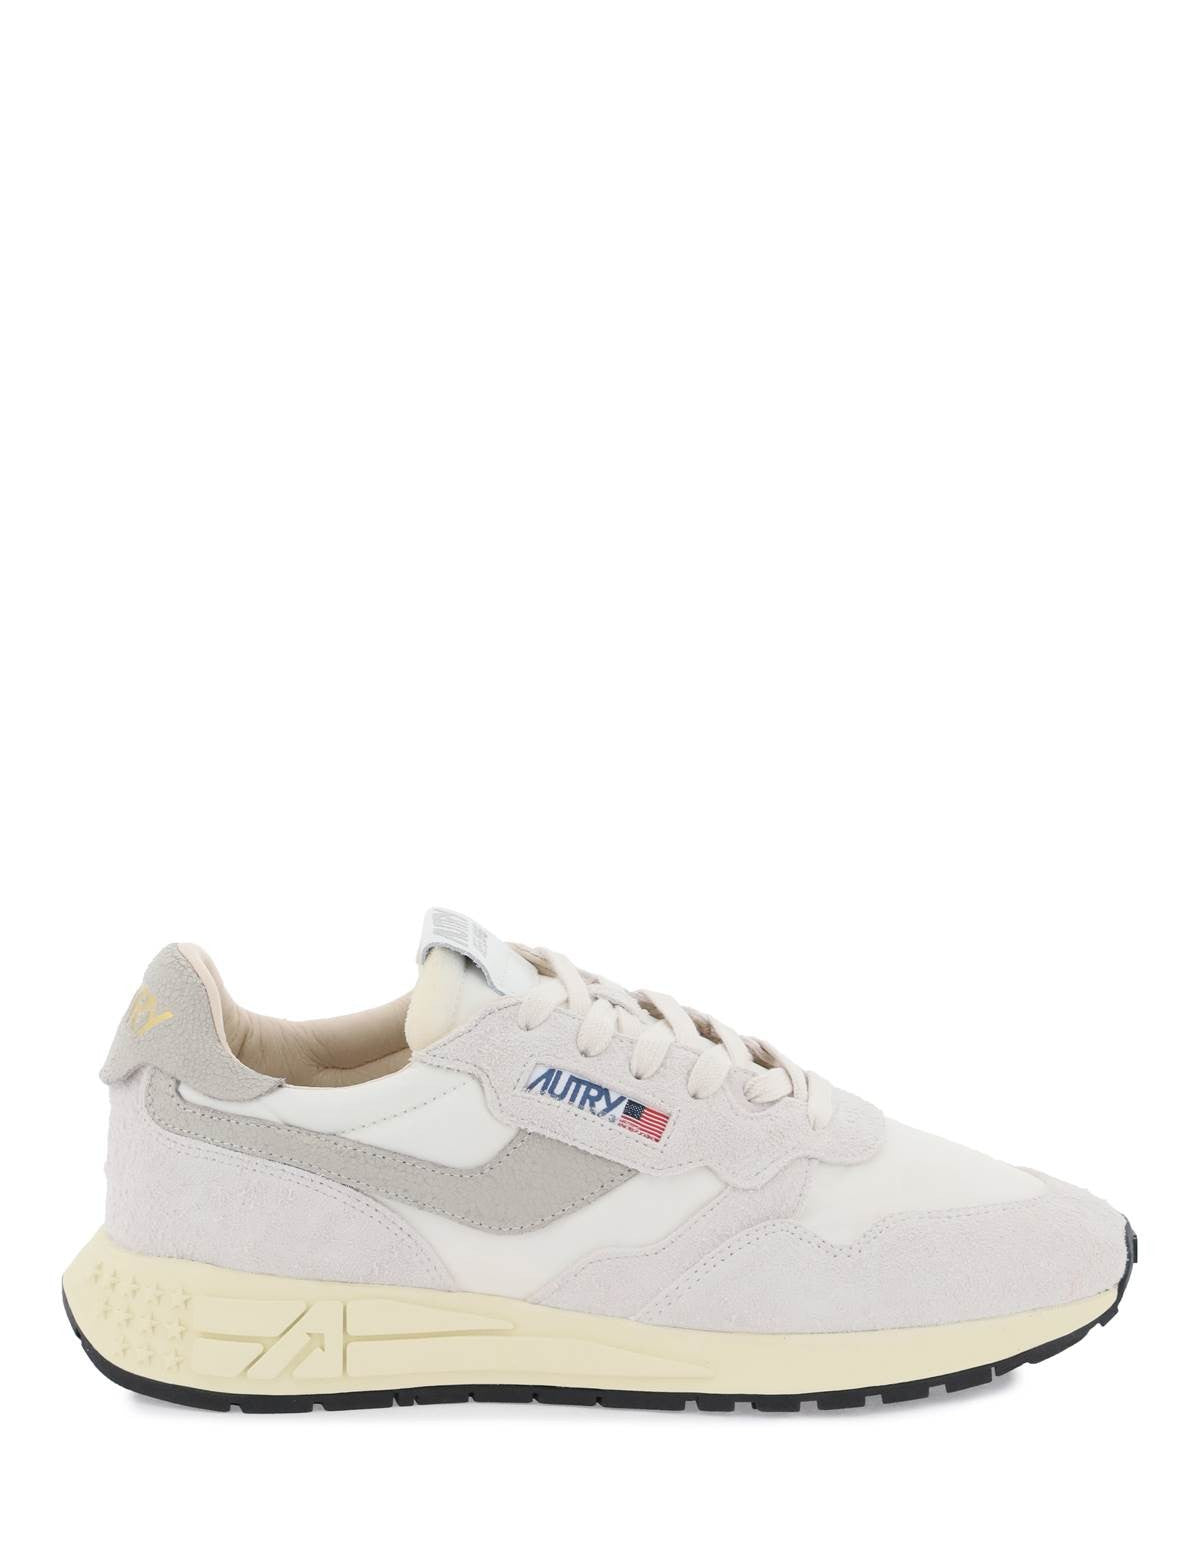 autry-reelwind-low-top-nylon-and-suede-sneakers.jpg